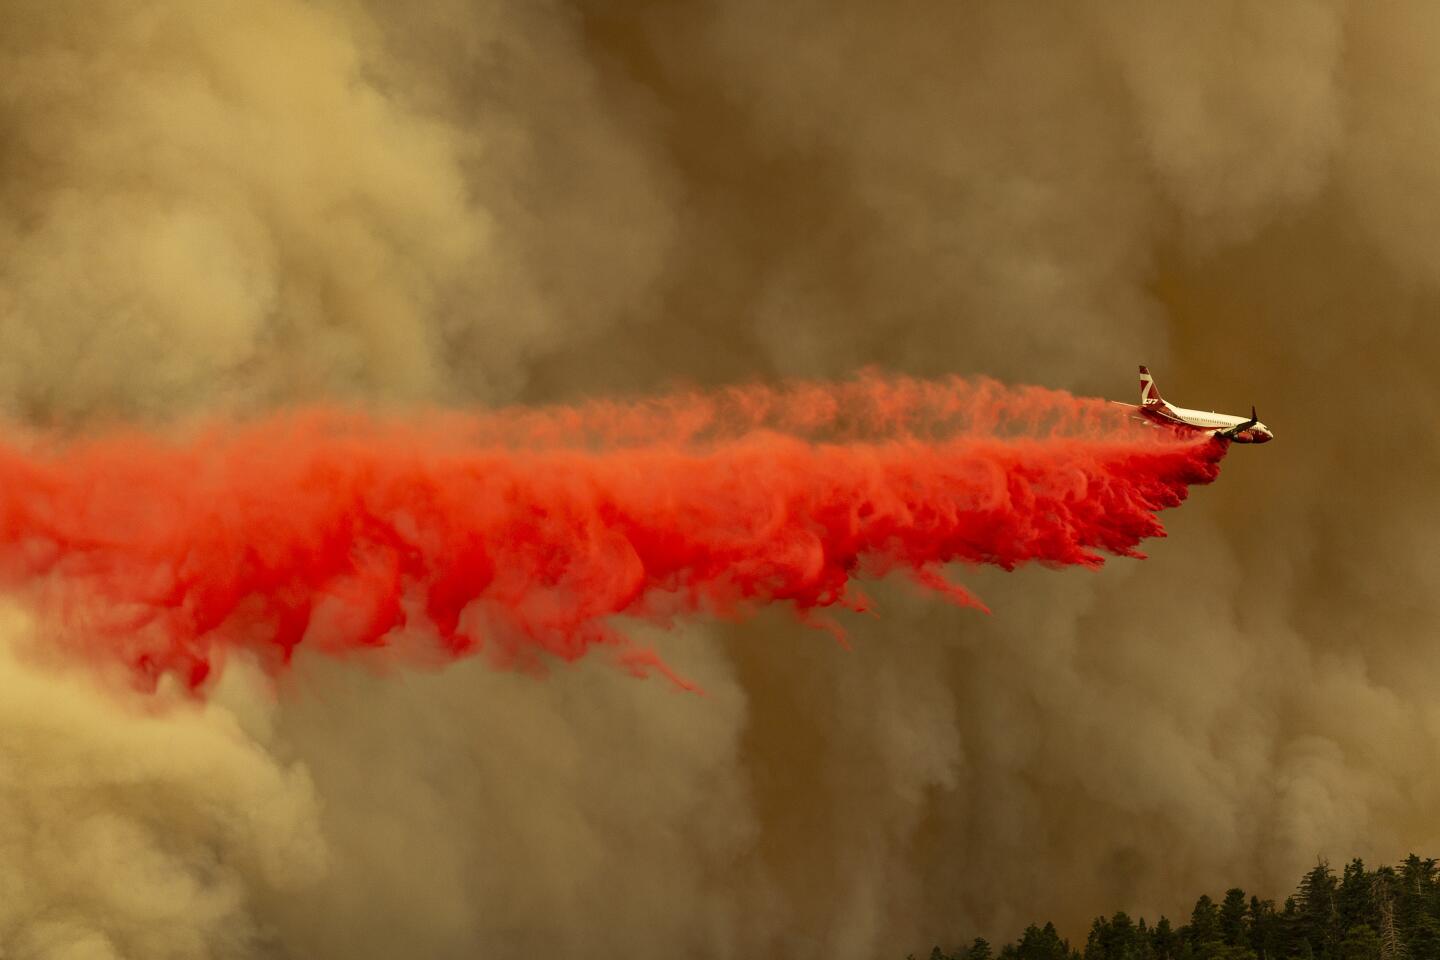 A Coulson 737 firefighting tanker jet drops fire retardant to slow the fire.